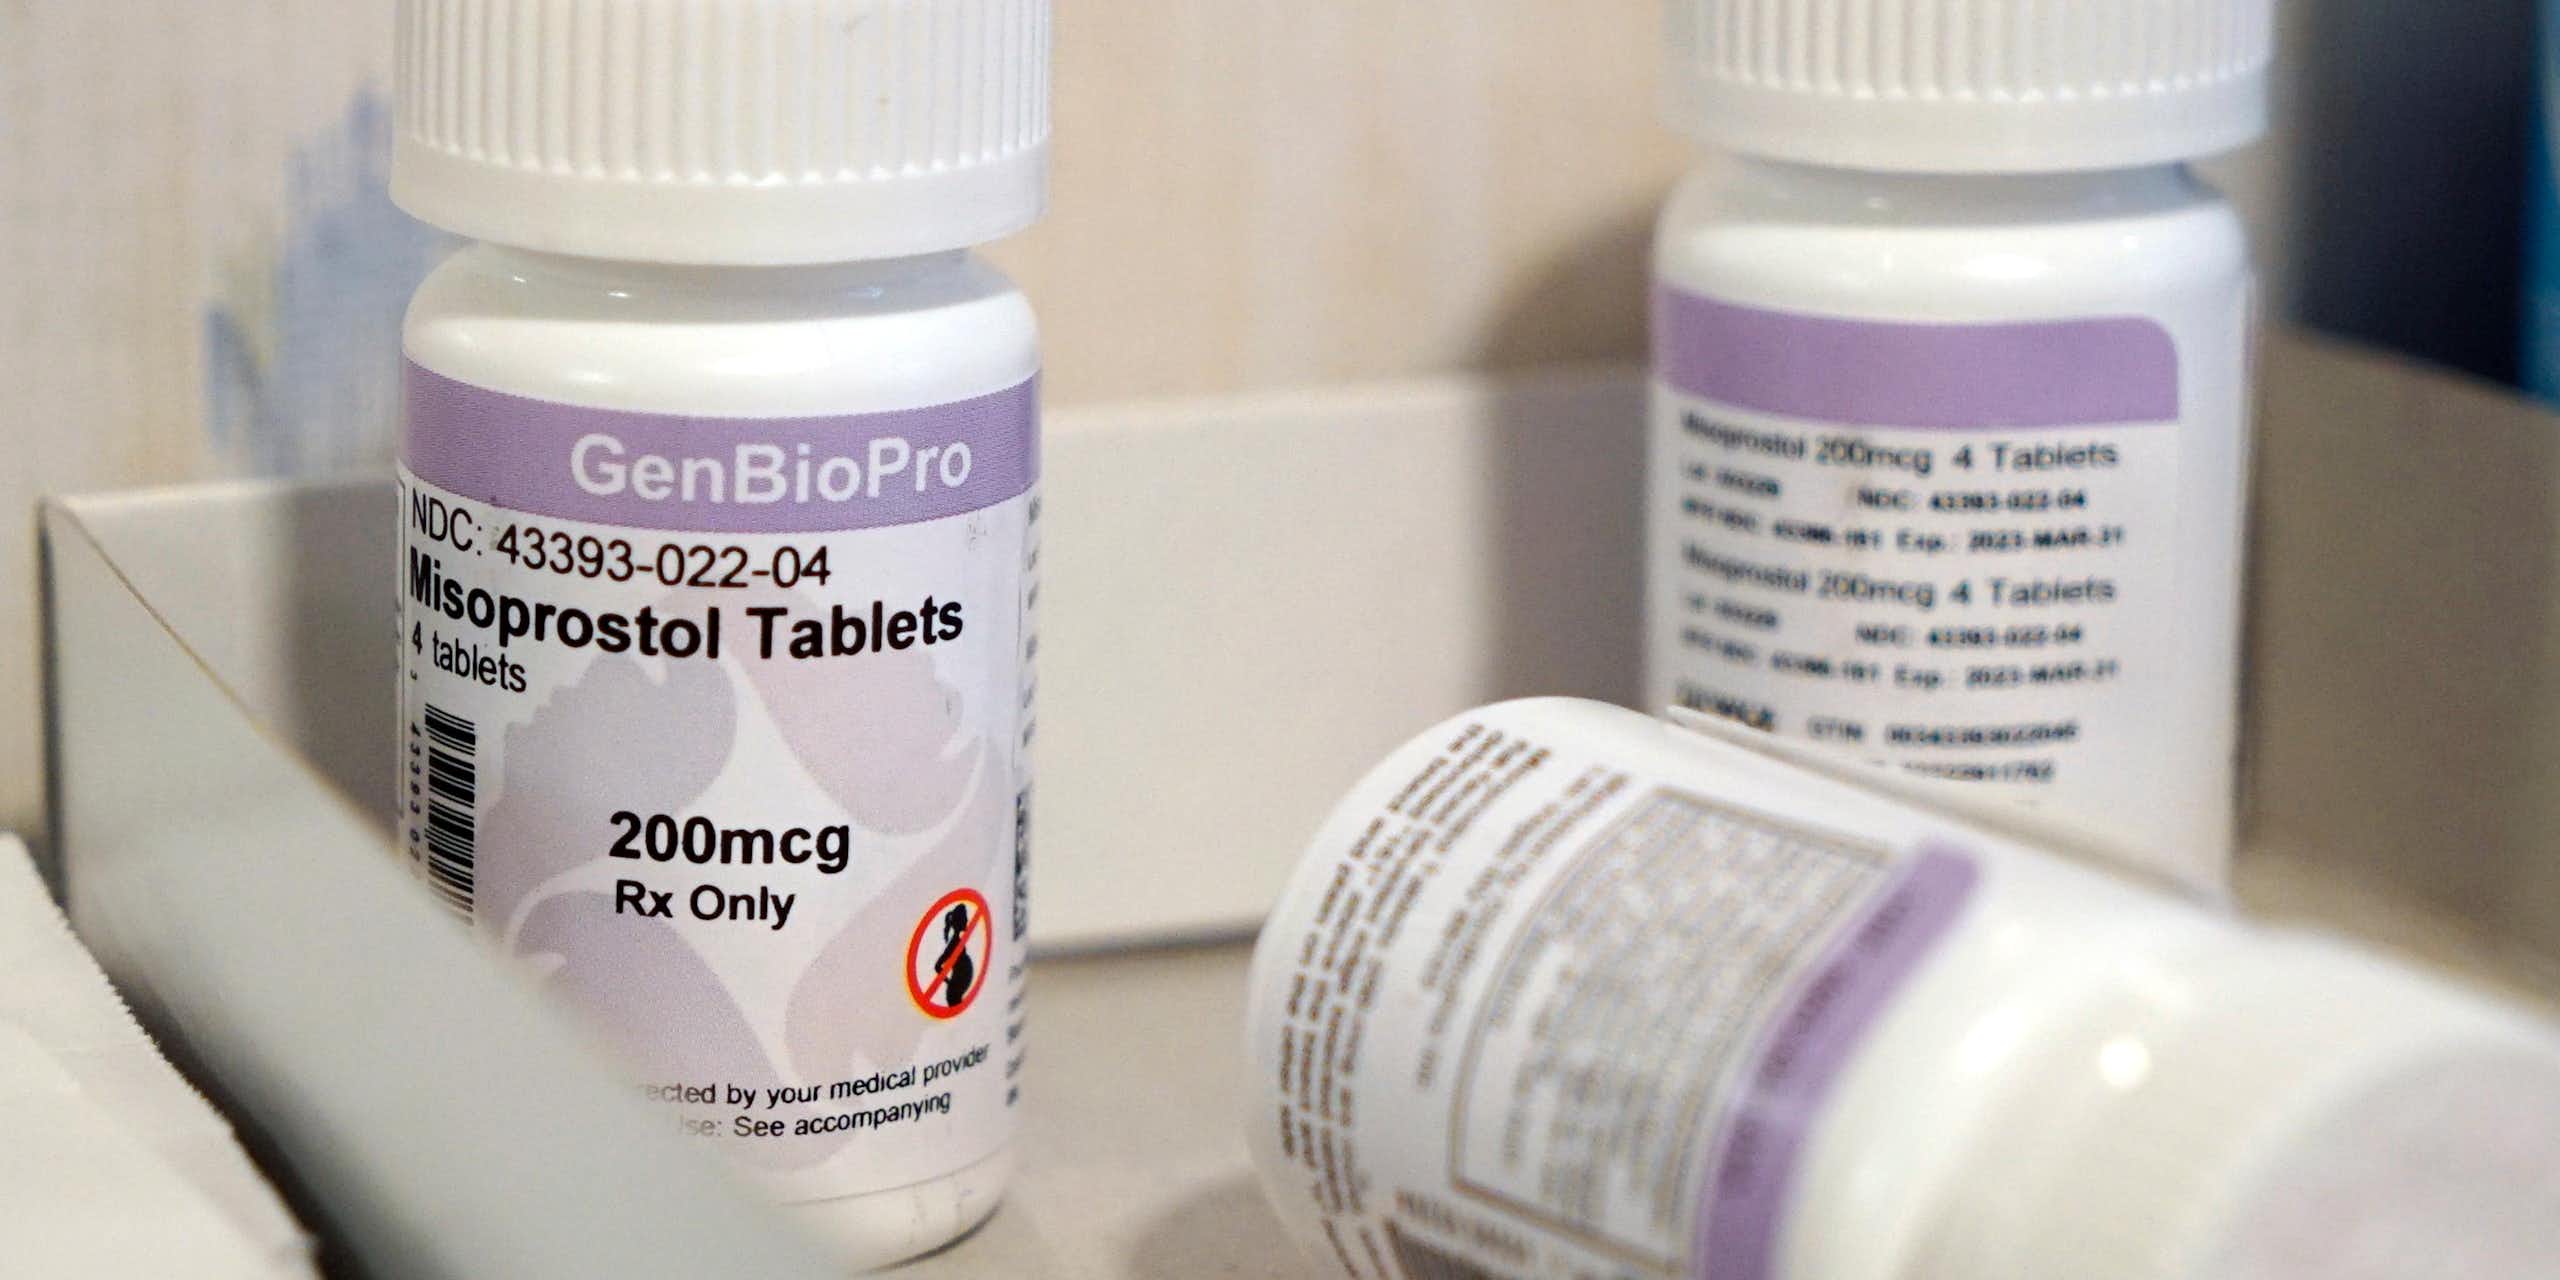 Three bottles of misoprostol tablets are displayed